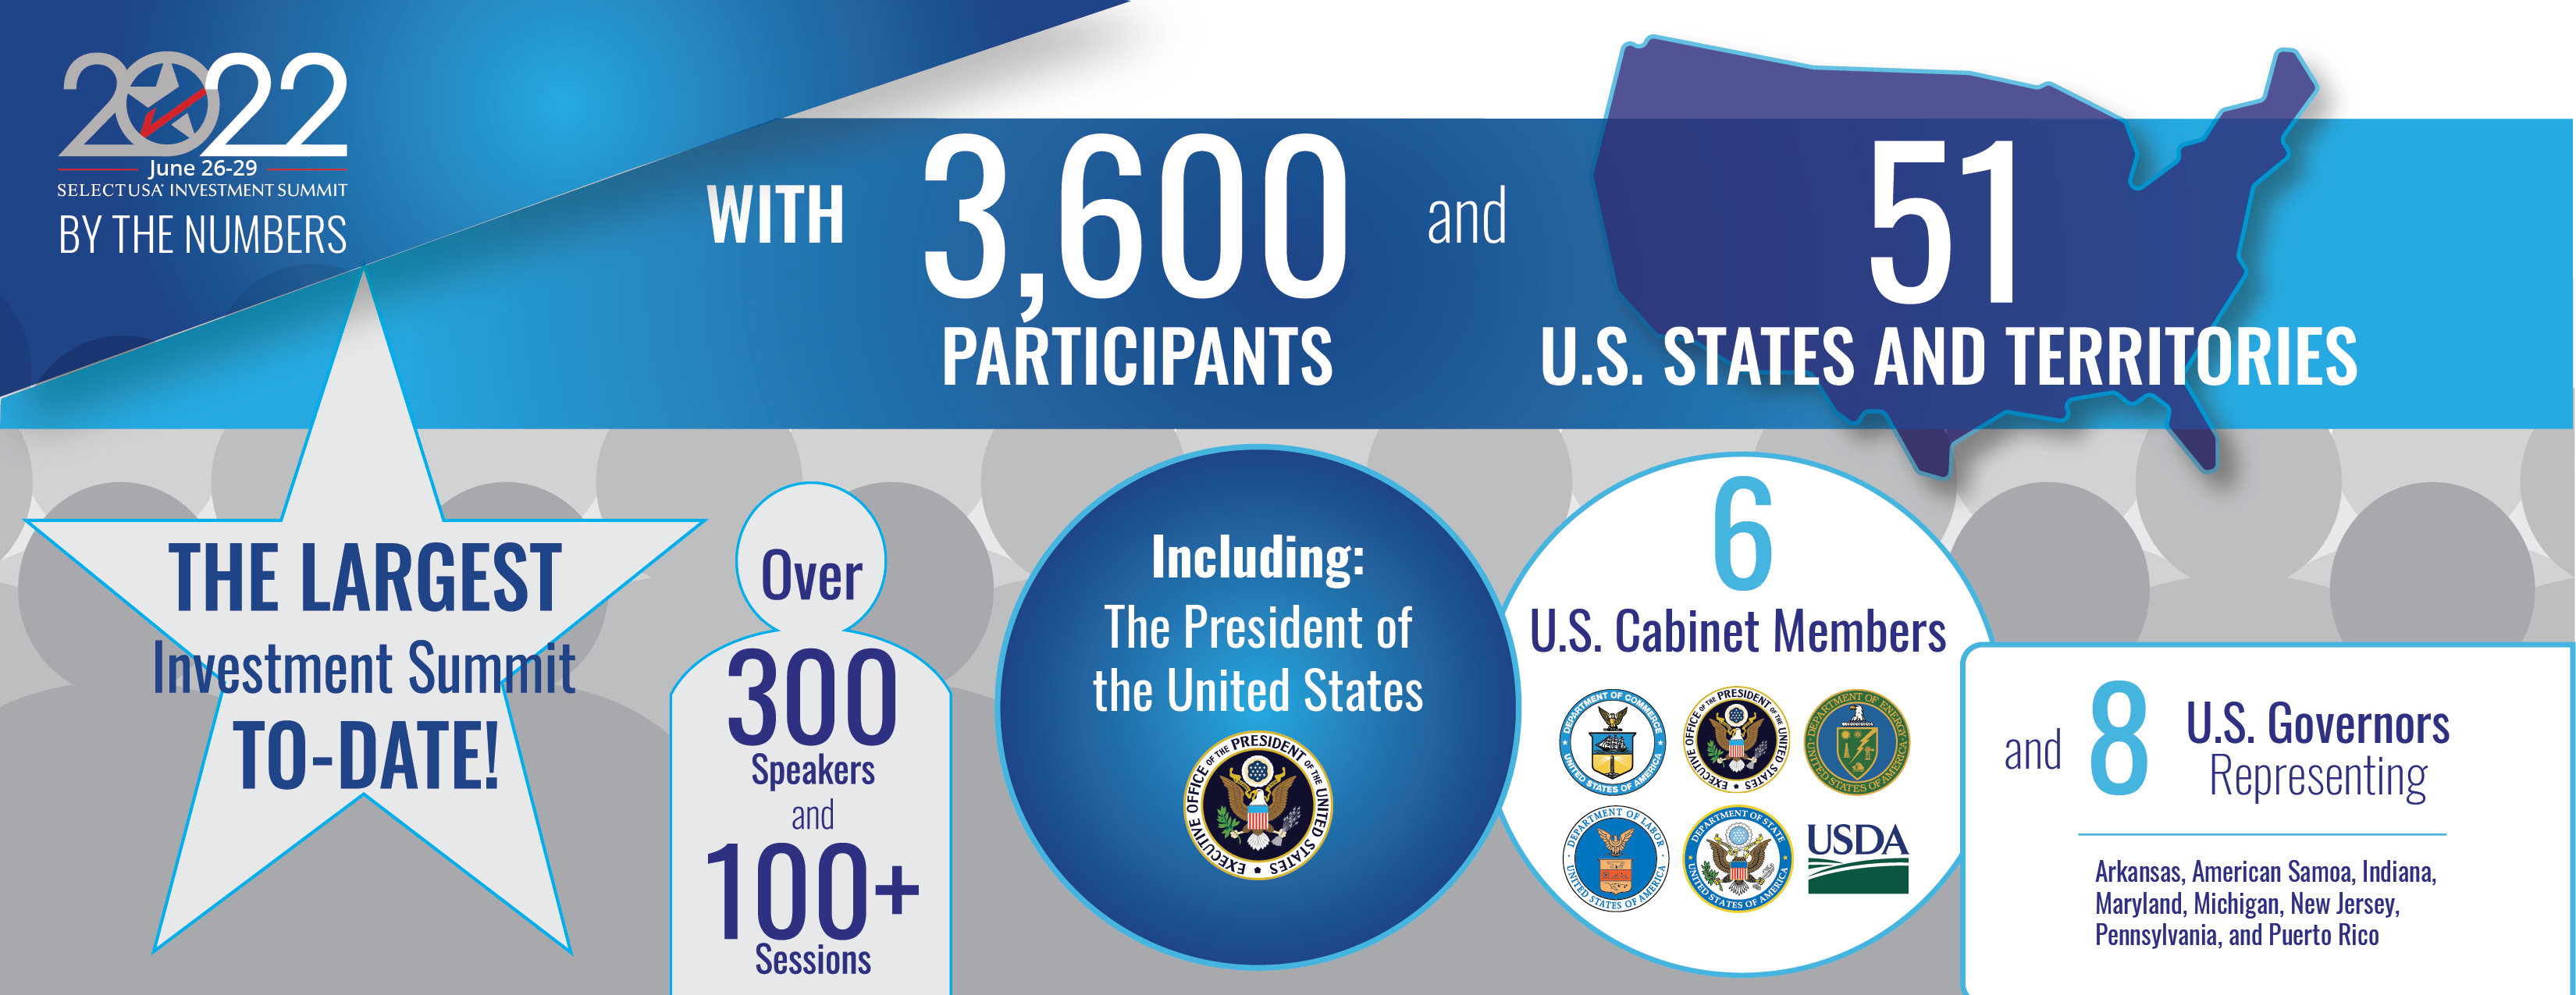 2022 SelectUSA Investment Summit Participant Highlights Graphic